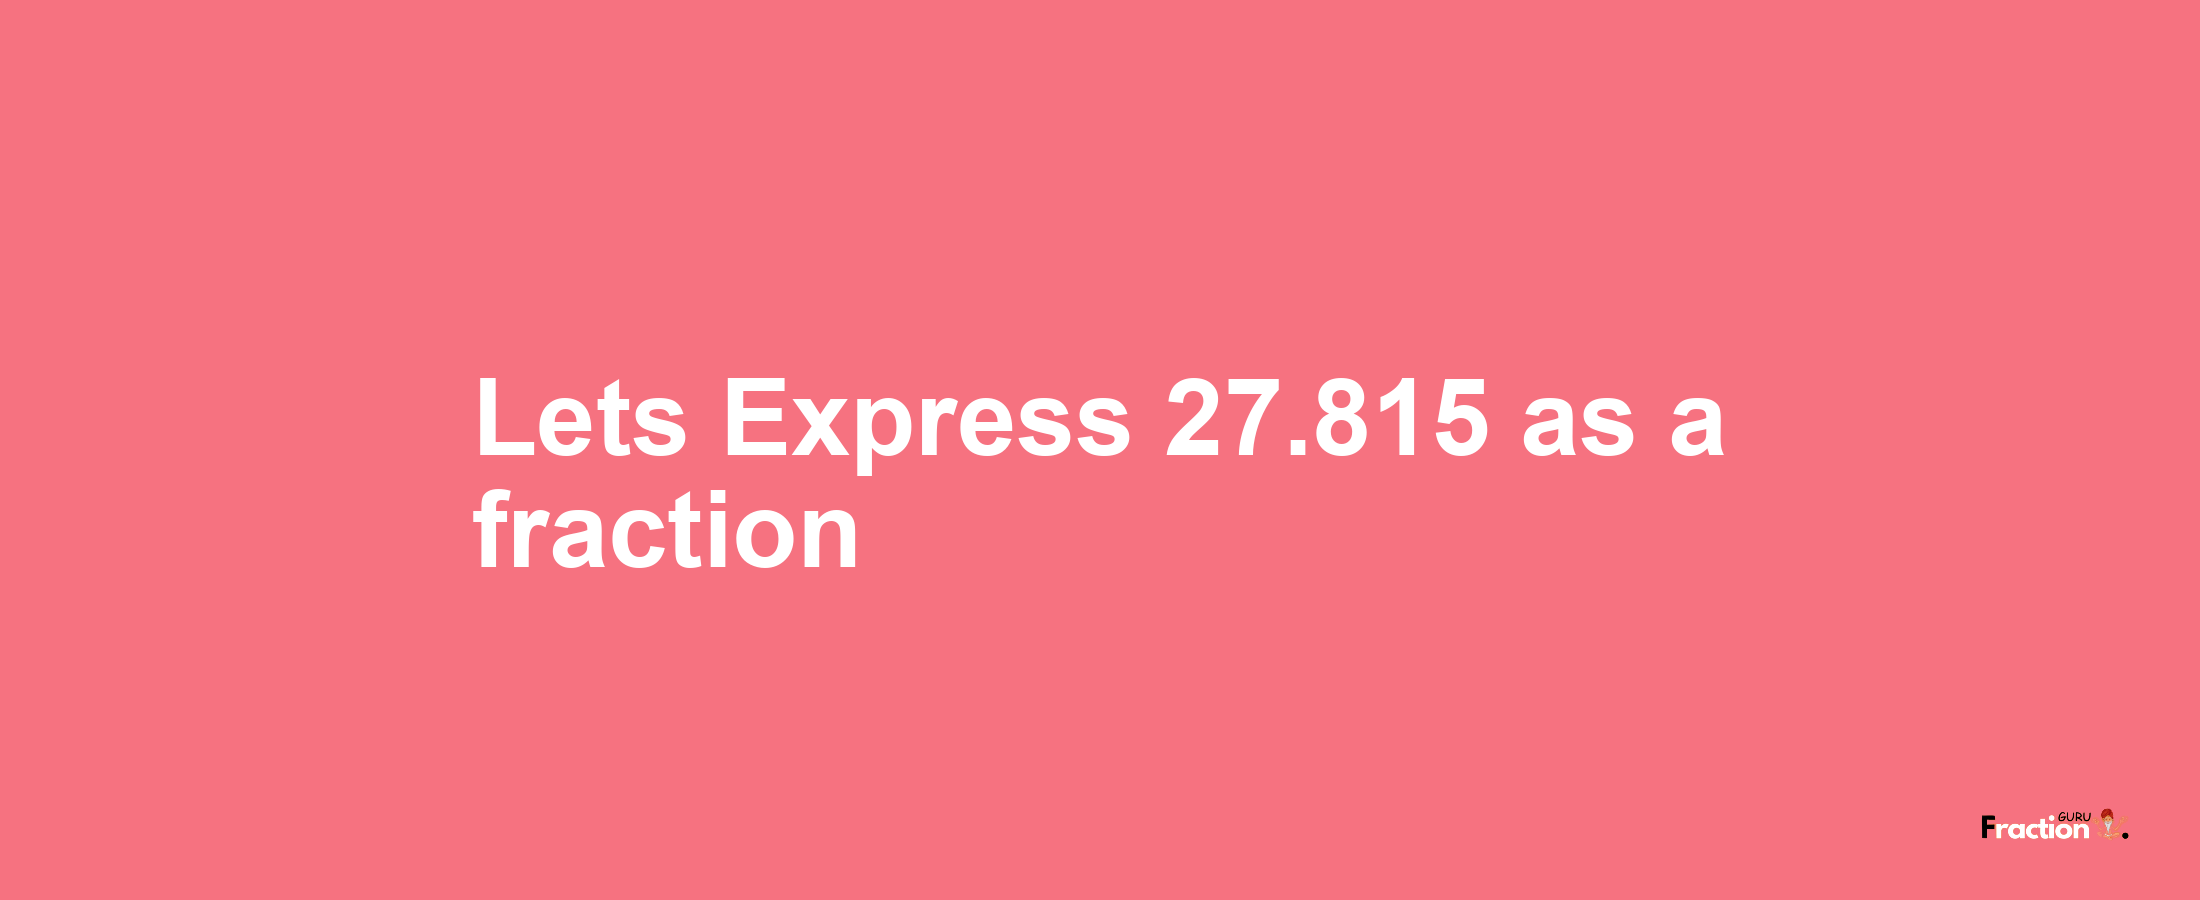 Lets Express 27.815 as afraction